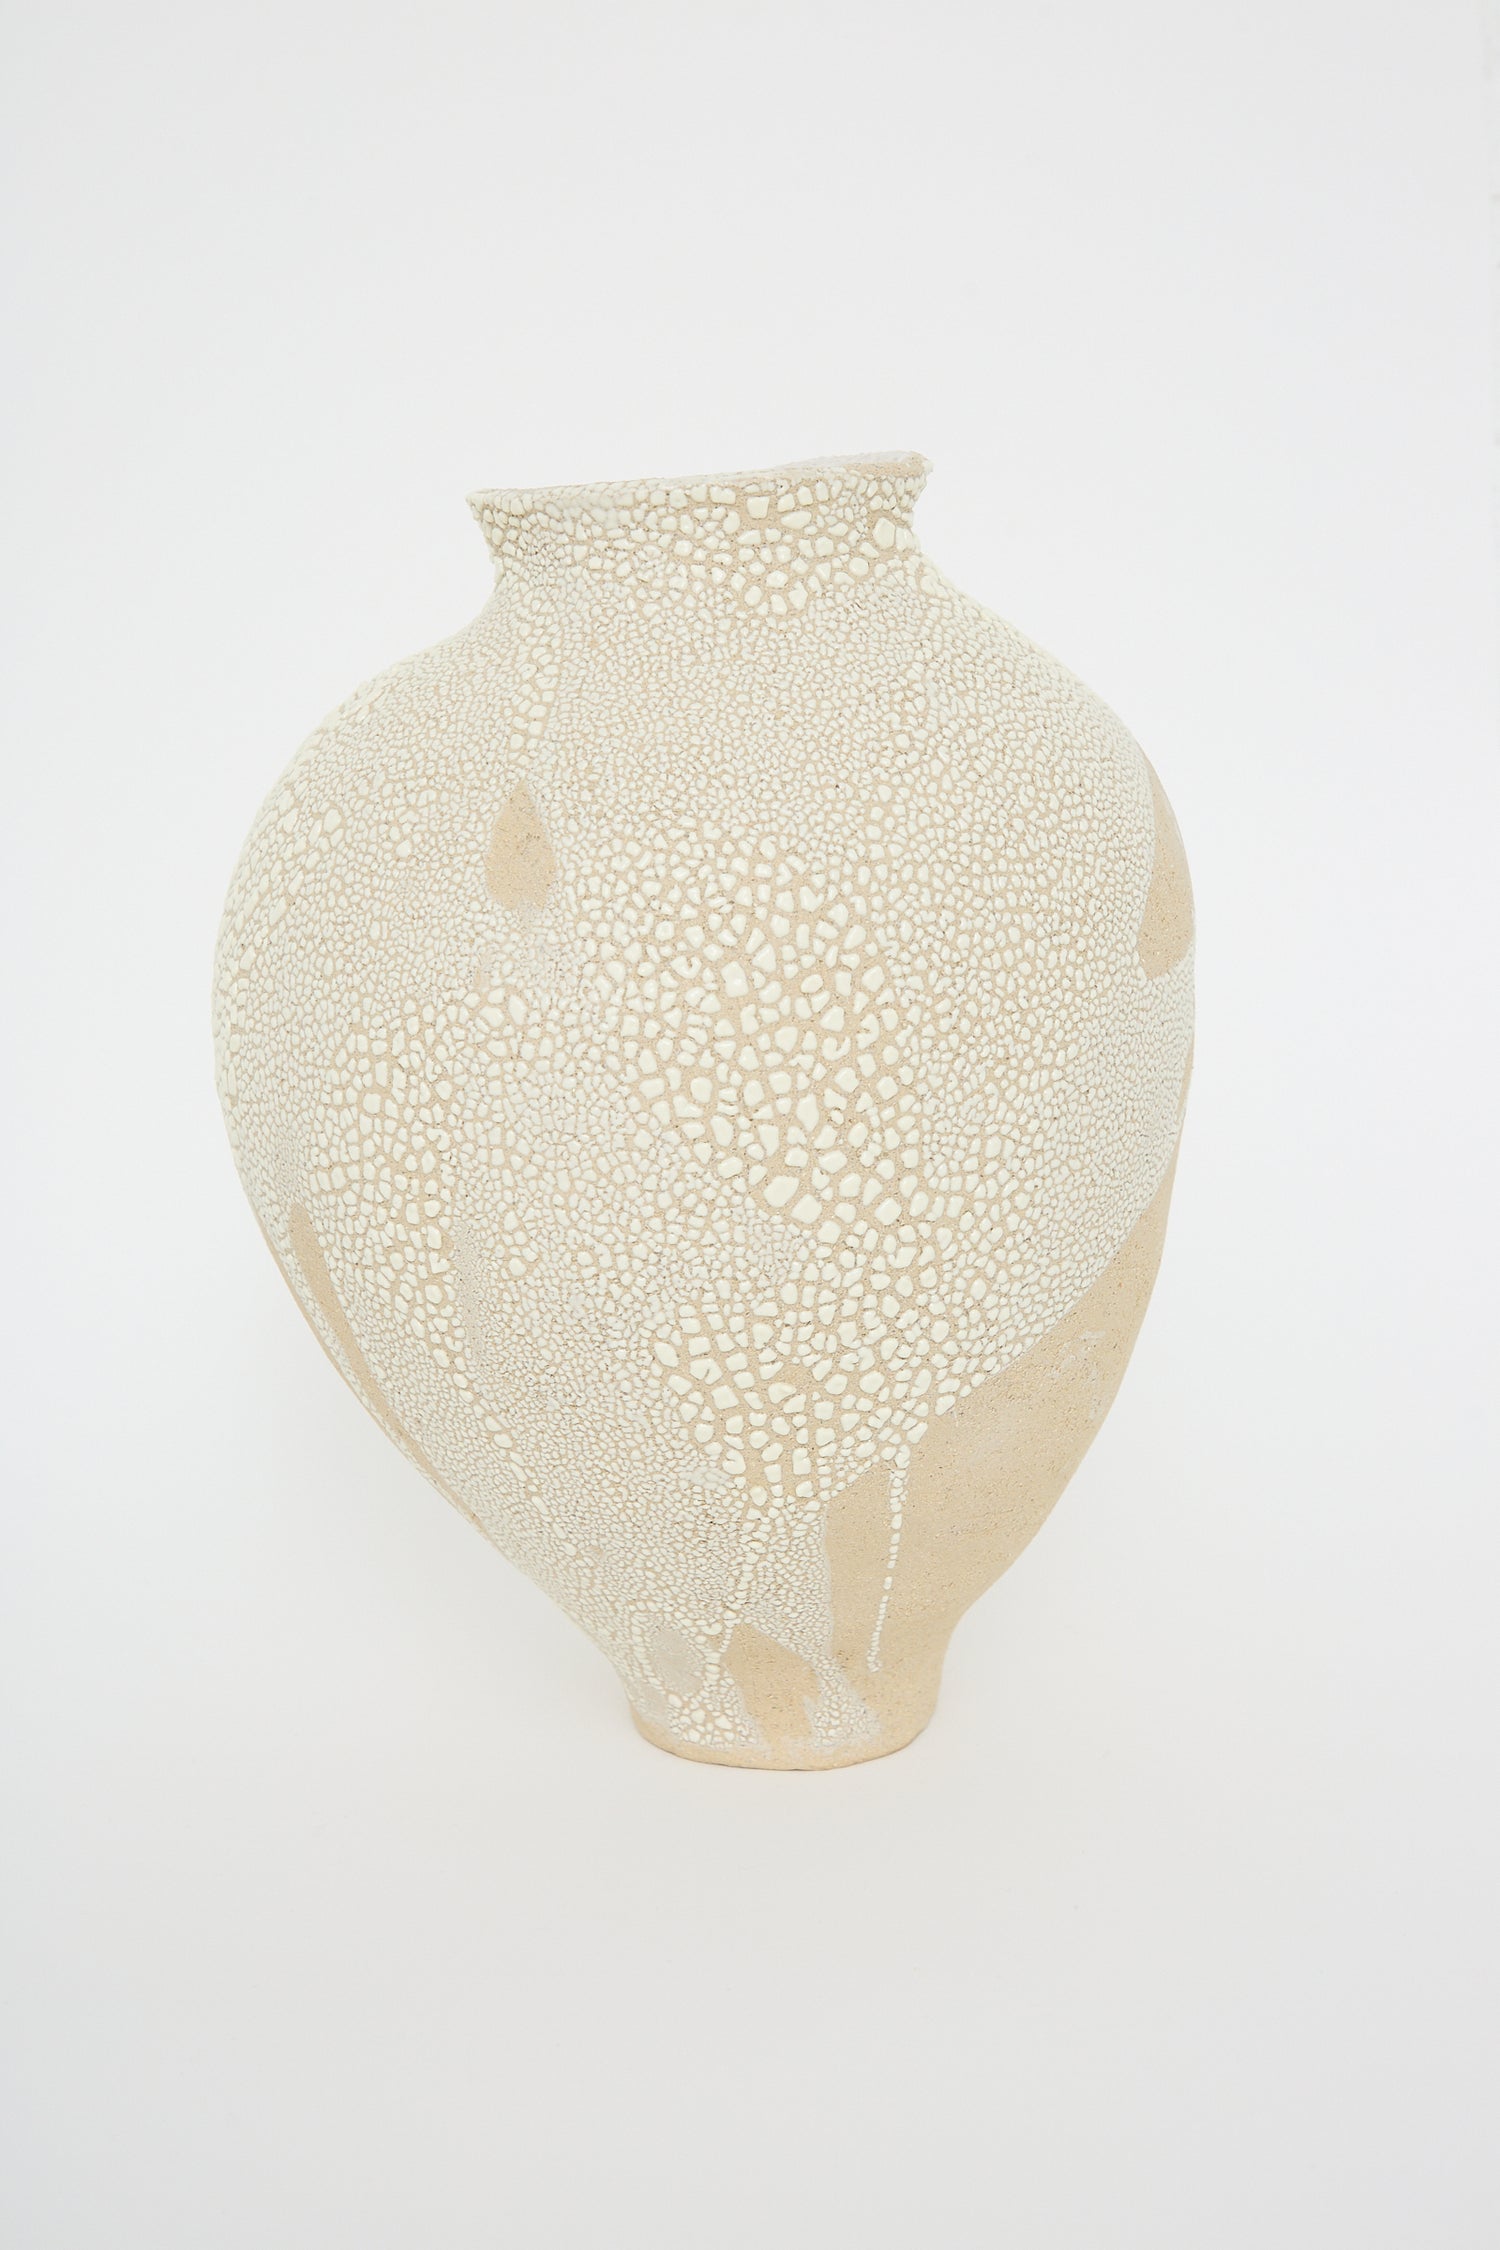 An intricately patterned Lost Quarry vessel No. 741 in White Sculpture Clay on a white background.